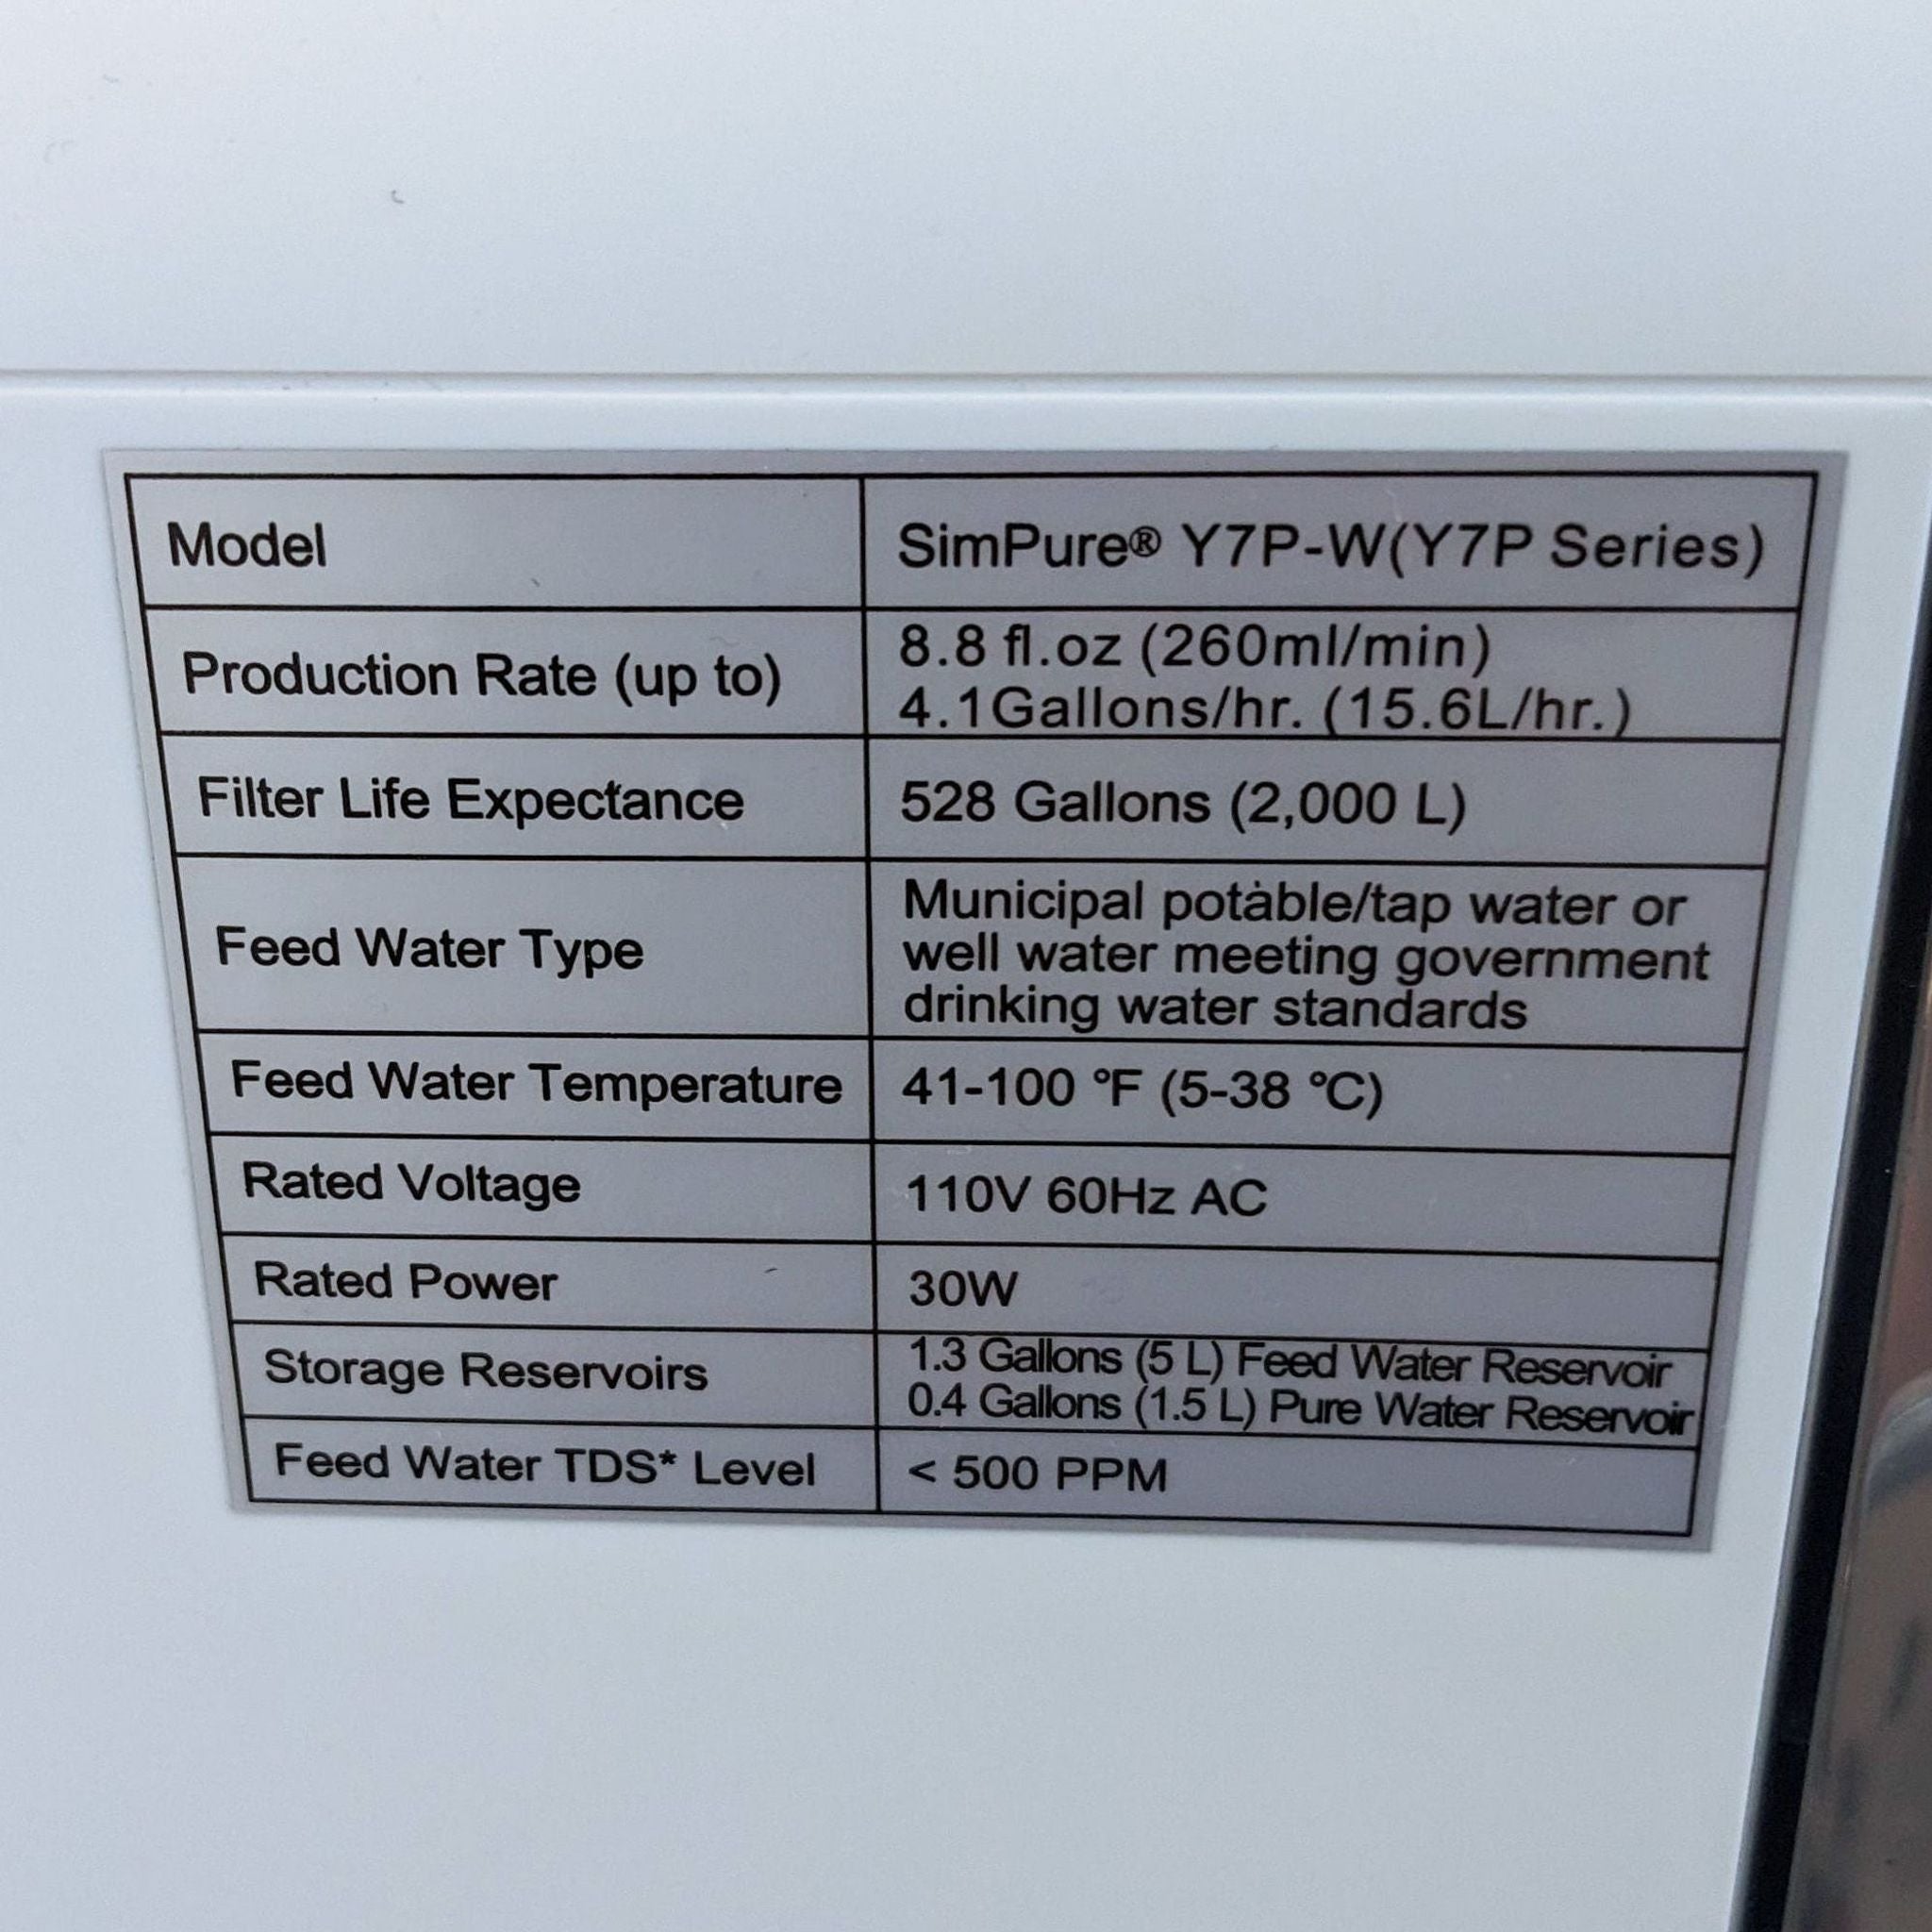 Alt text 3: Close-up of a label detailing model specifications and features of a Simpure water purifier.